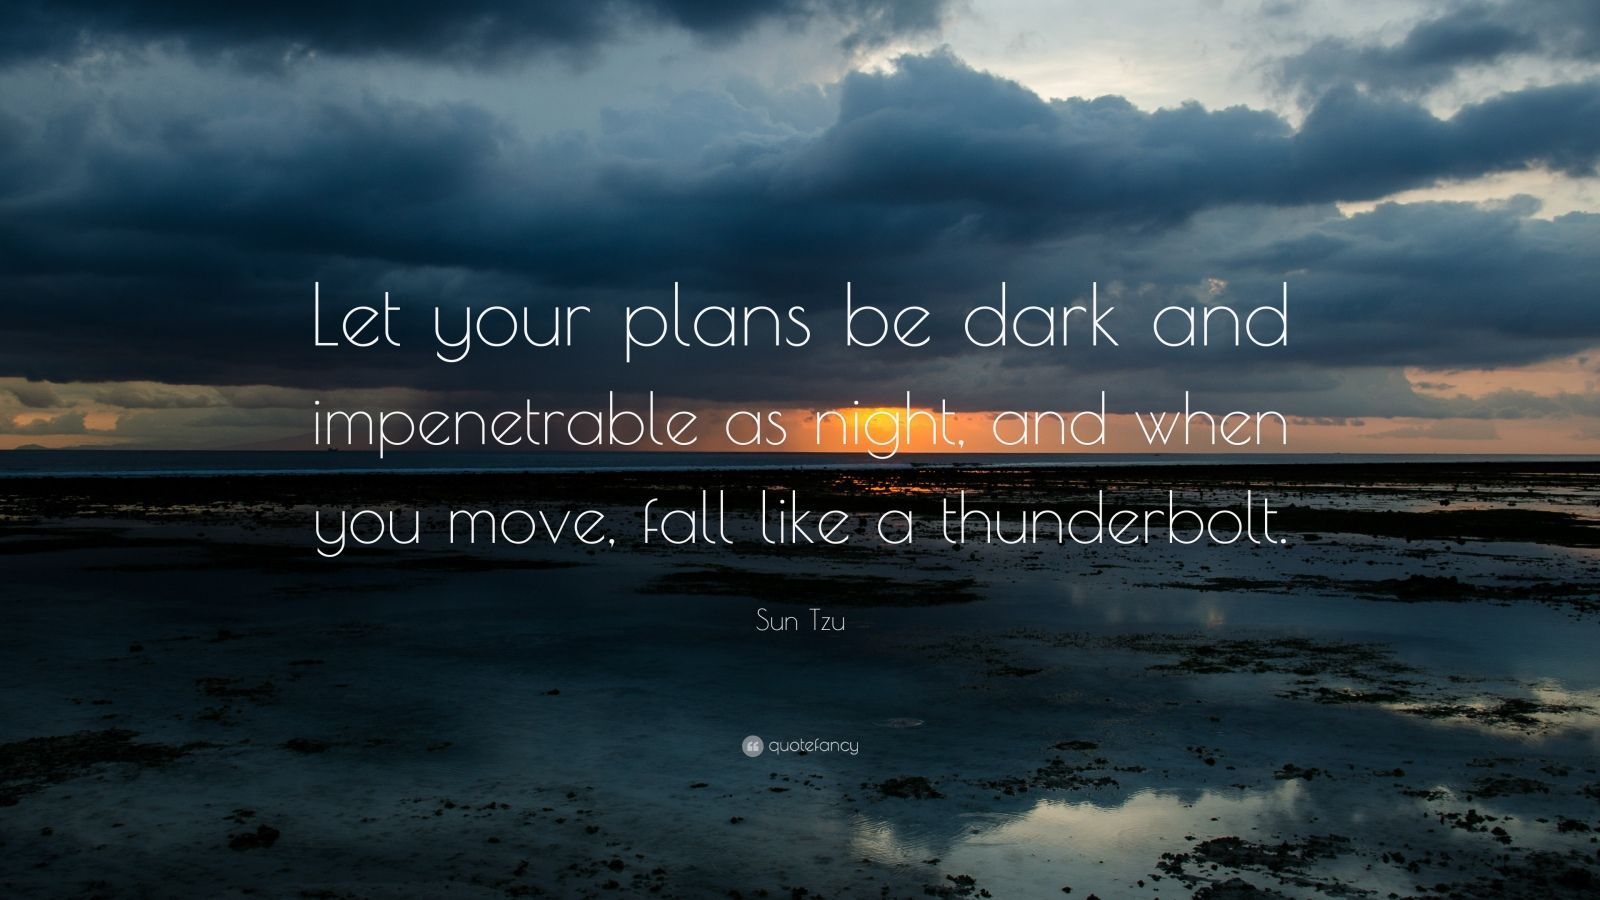 Sun Tzu Quote: “Let your plans be dark and impenetrable as night, and when you move, fall like a thunderbolt. Steve jobs quotes, Job quotes, Nelson mandela quotes